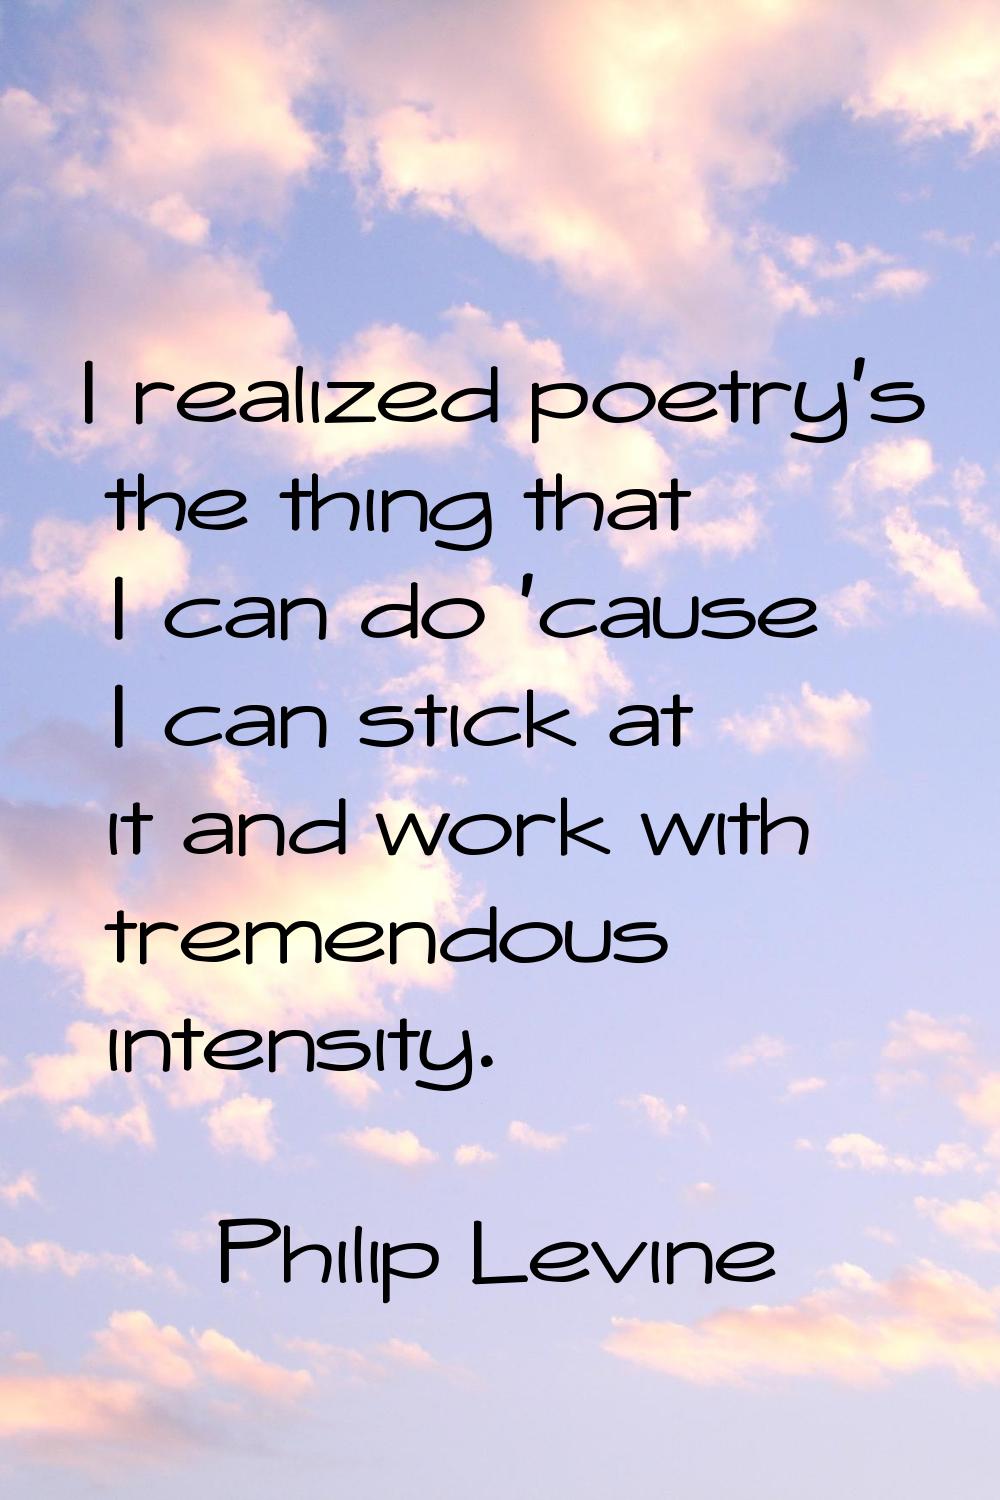 I realized poetry's the thing that I can do 'cause I can stick at it and work with tremendous inten